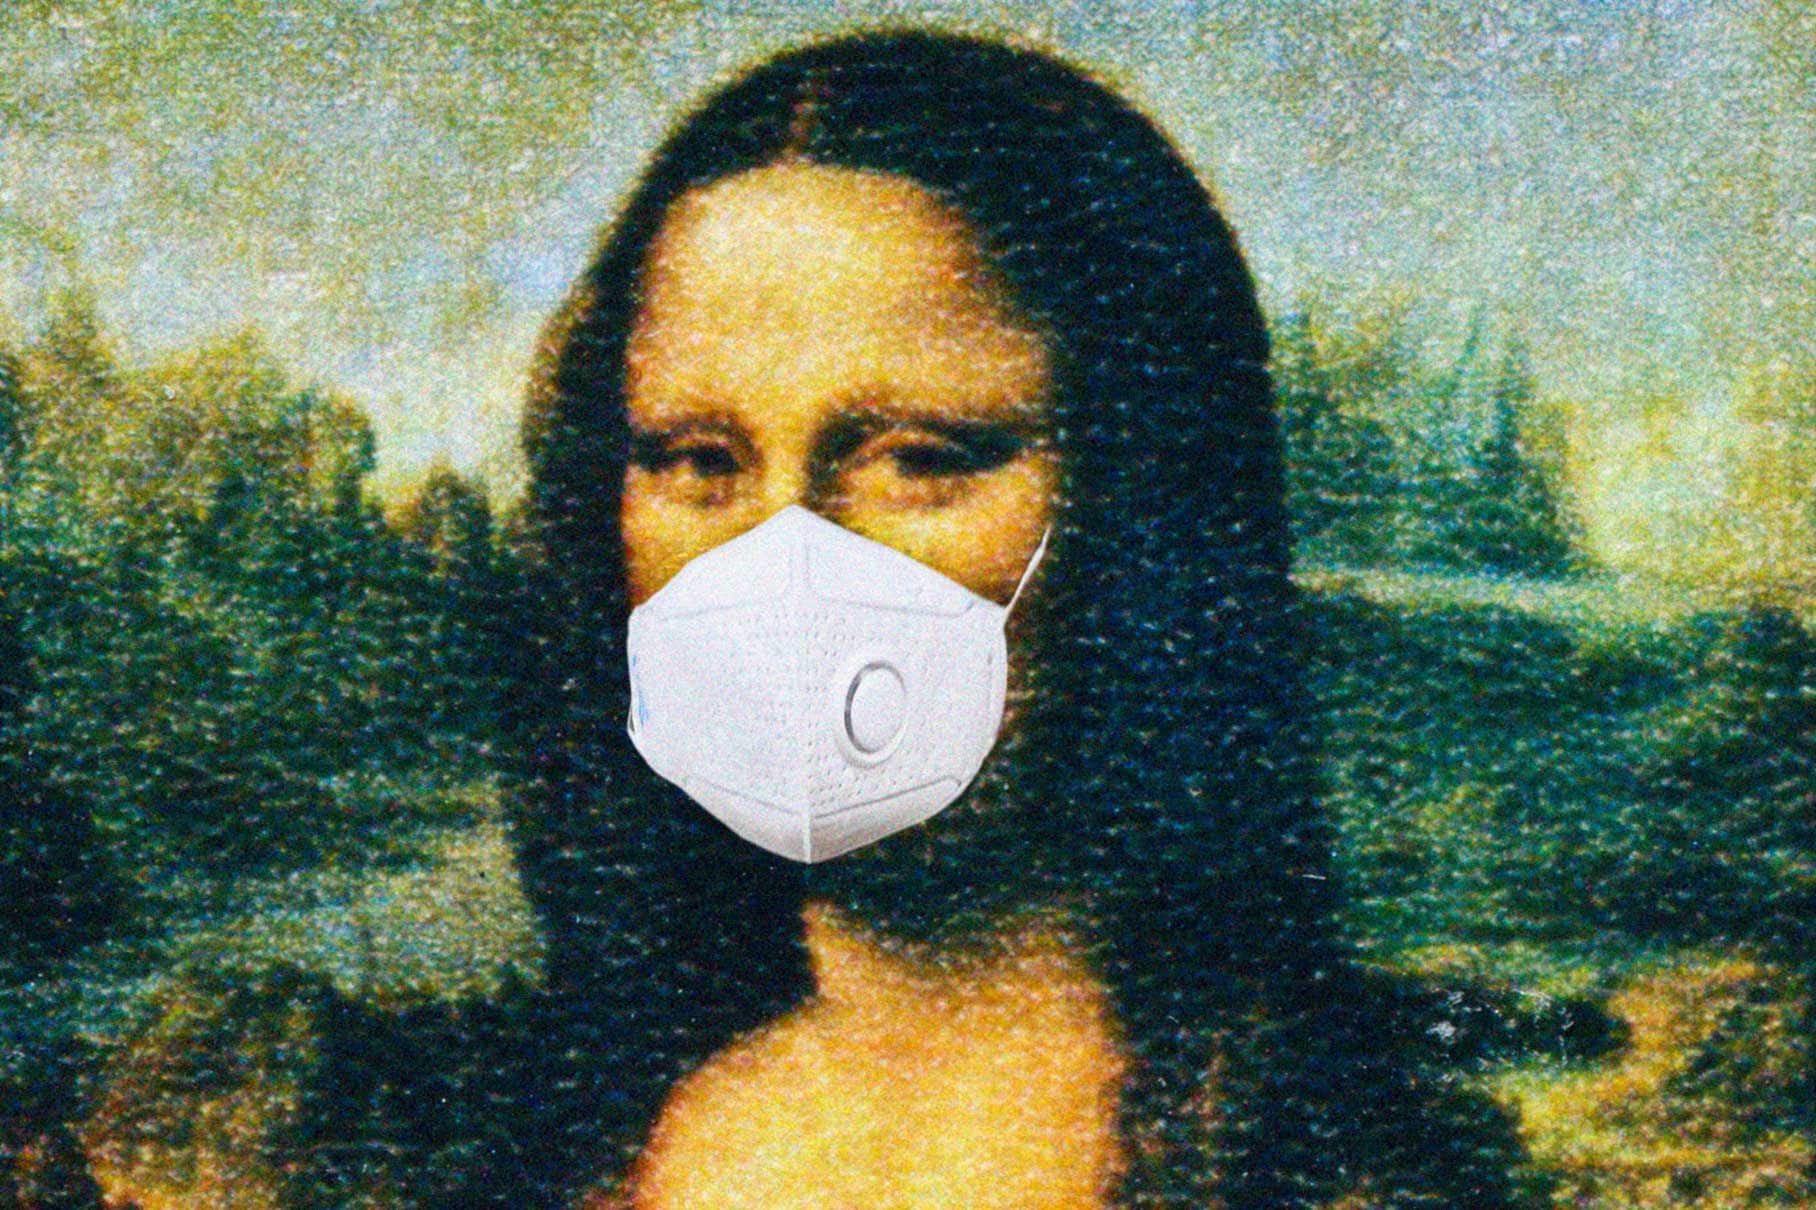 The Louvre and James Bond show us what coronavirus could cost us ...